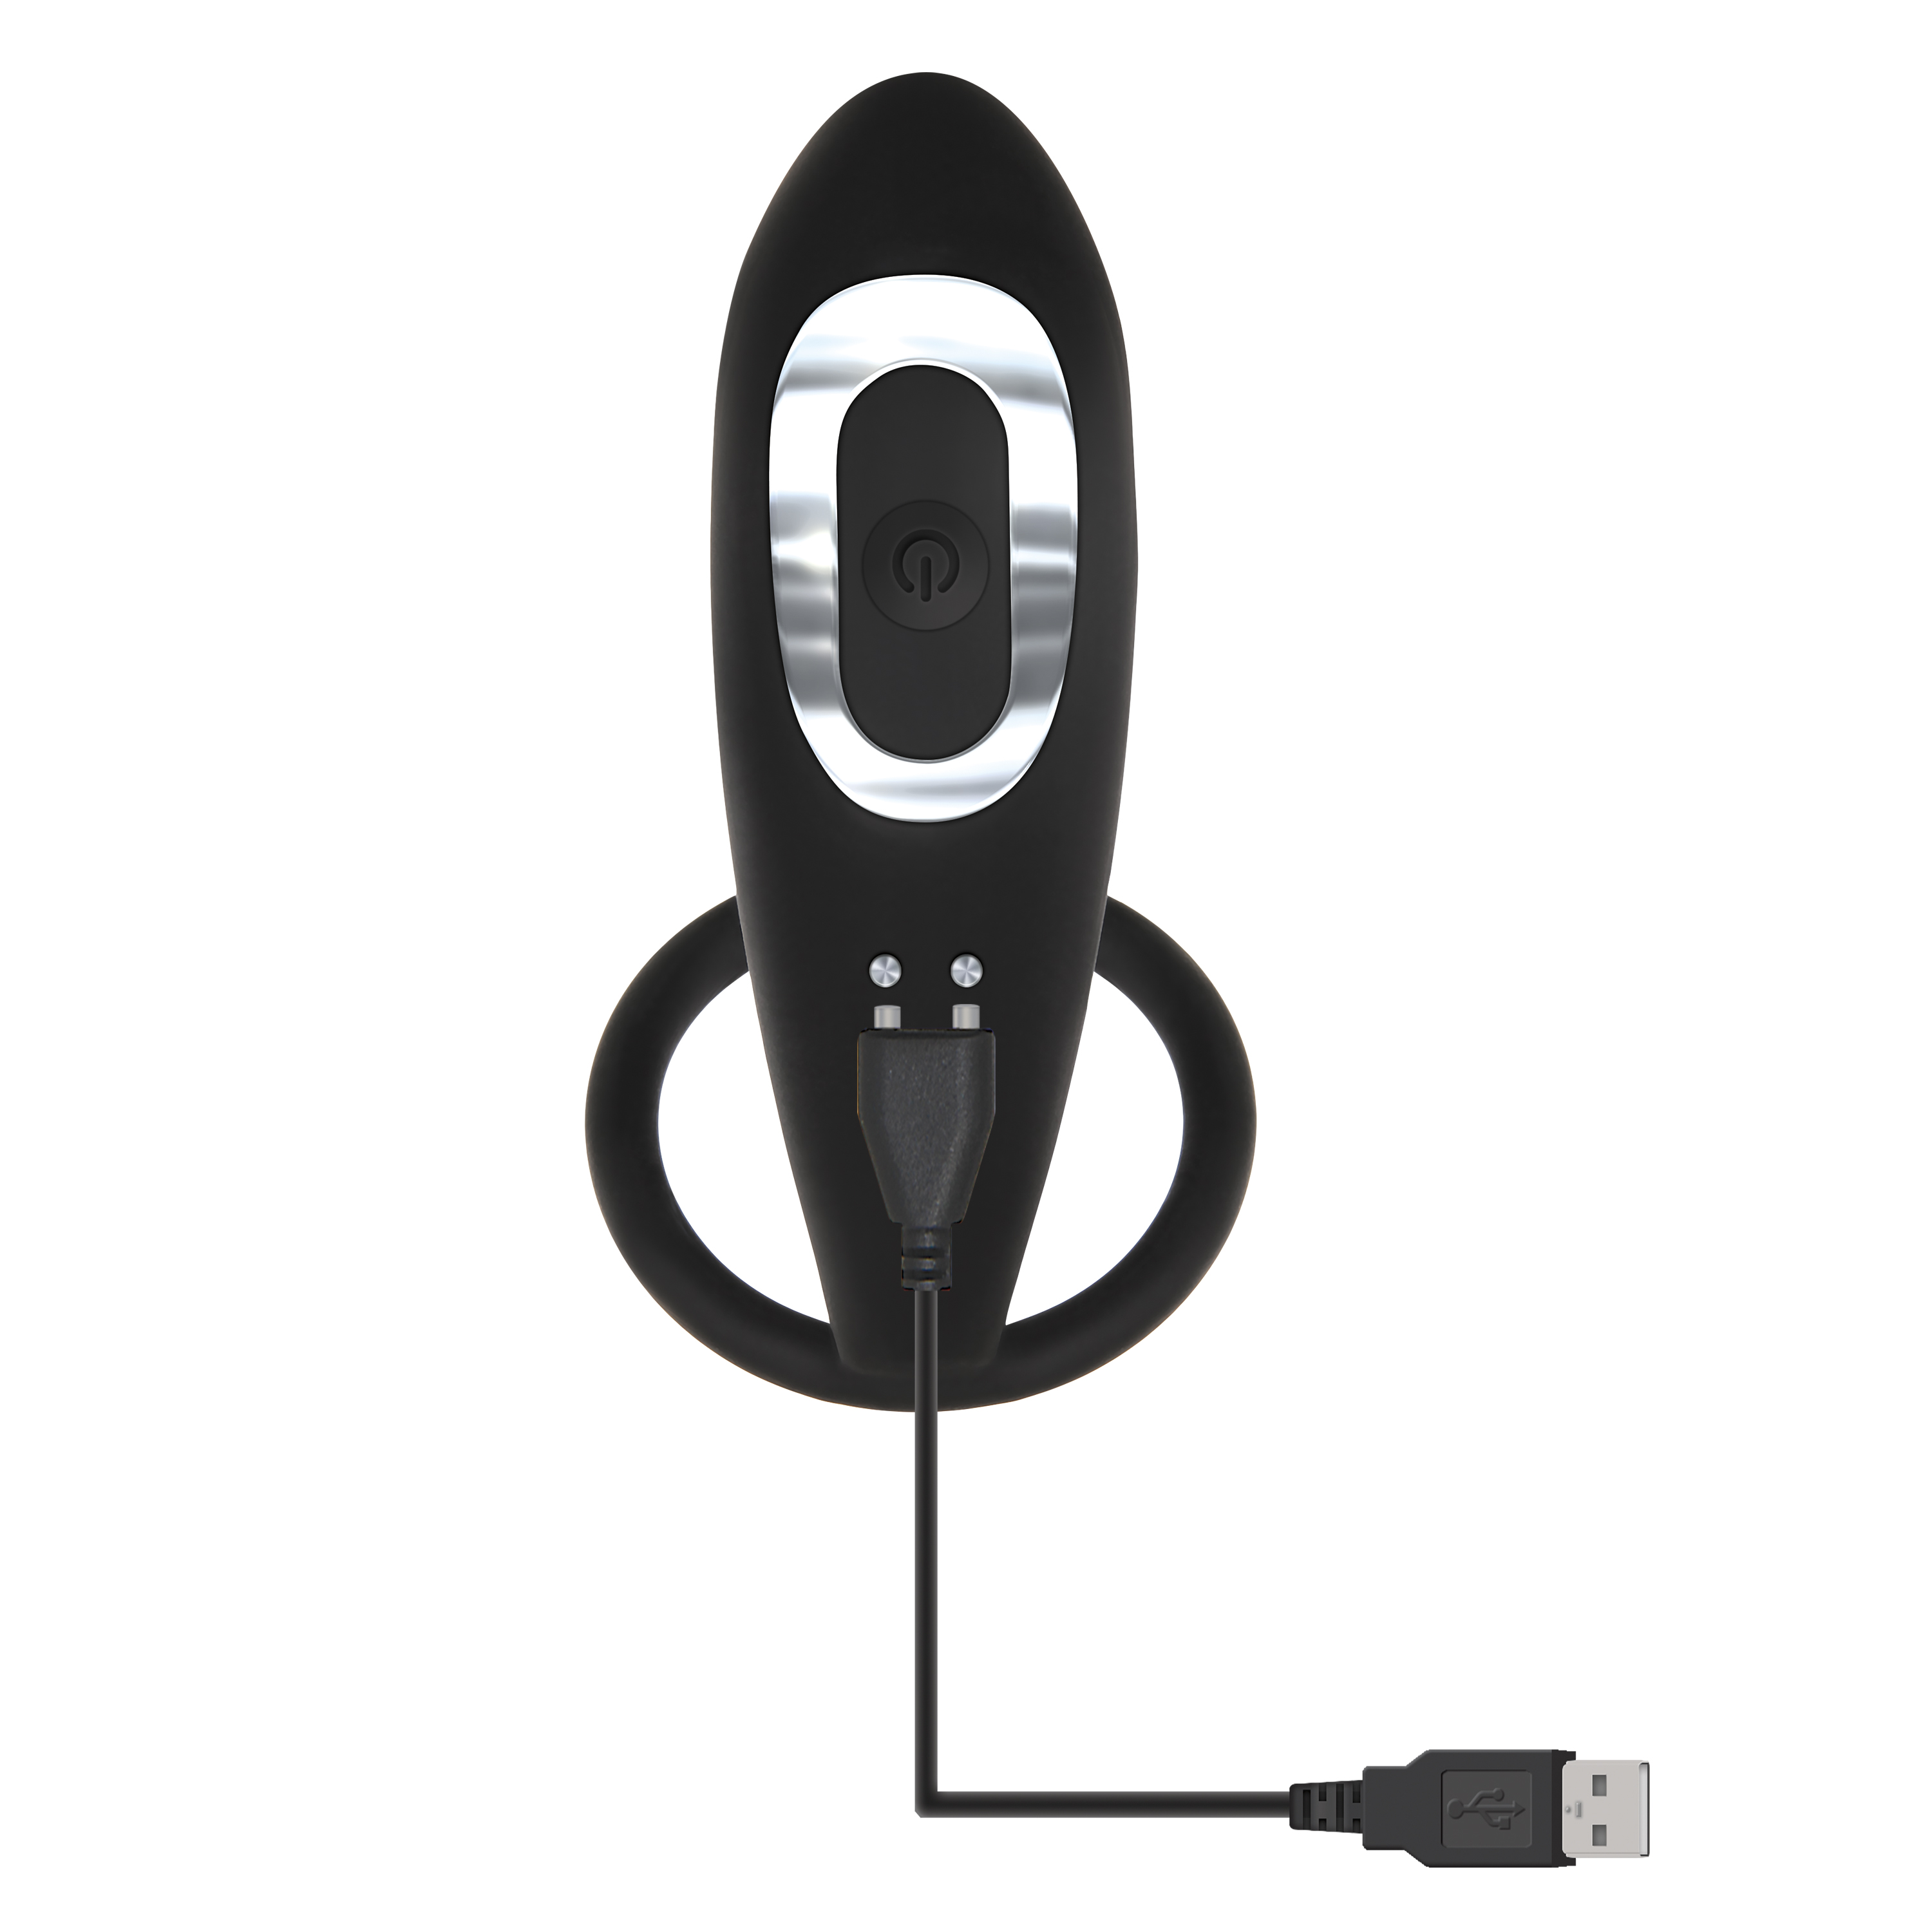 ADAM'S PROSTATE PLEASER + C RINGRECHARGEABLE